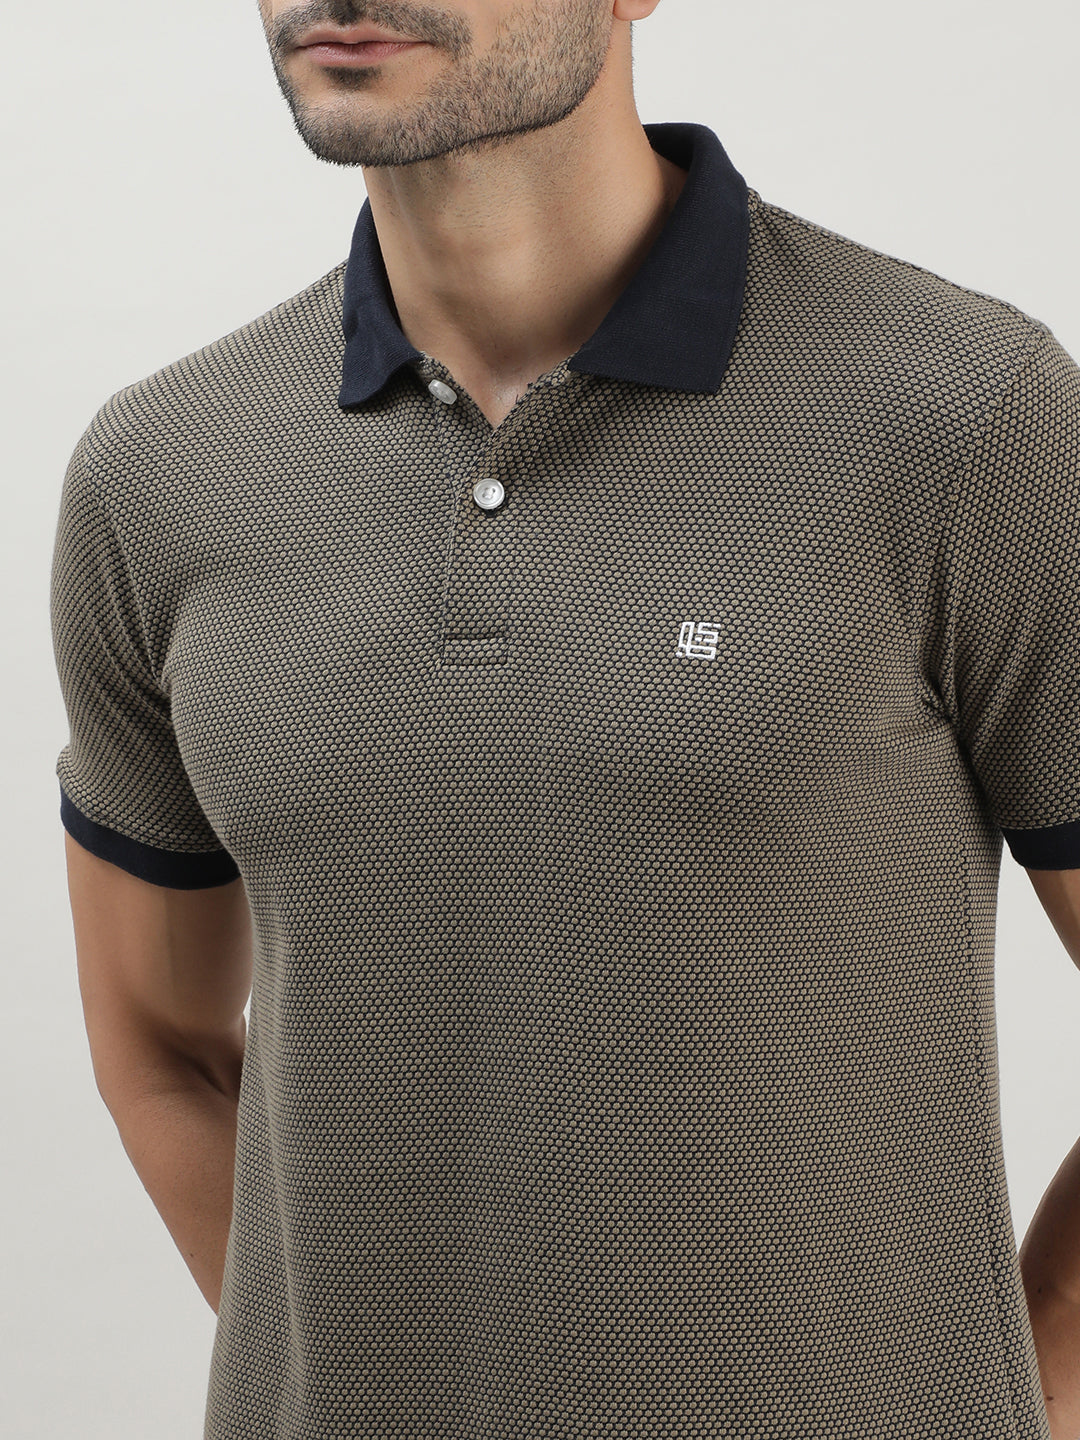 Contrast Polo T-shirt for Men